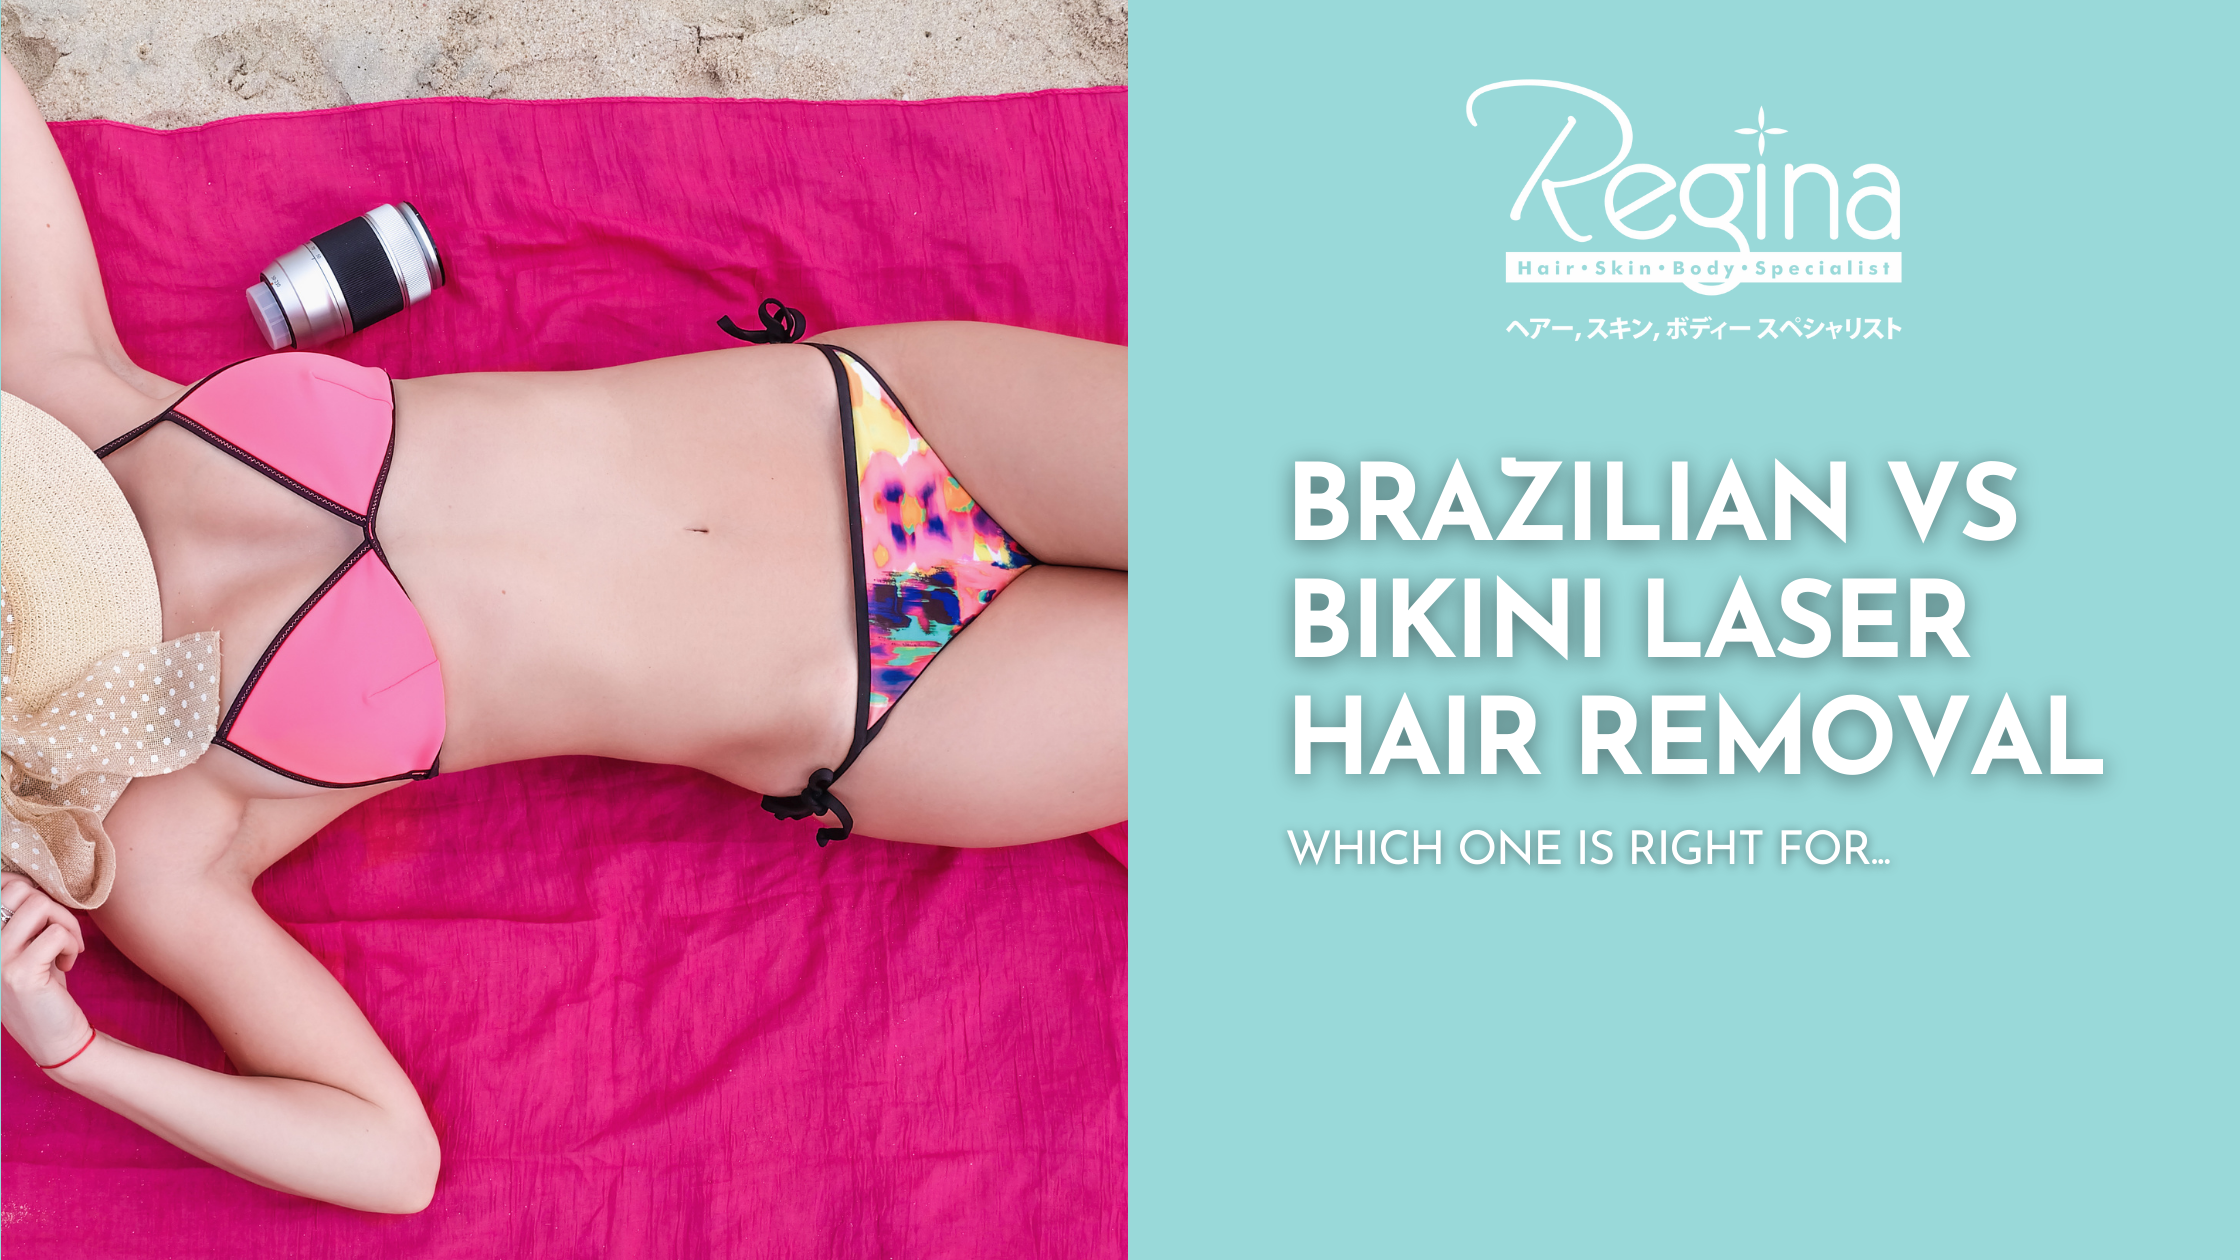 Regina Hair Removal Specialist » Regina is a hair removal salon in  Singapore specializing in Super Hair Removal (SHR) treatments and face and  body rejuvenation. We are committed to provide safe, hygienic